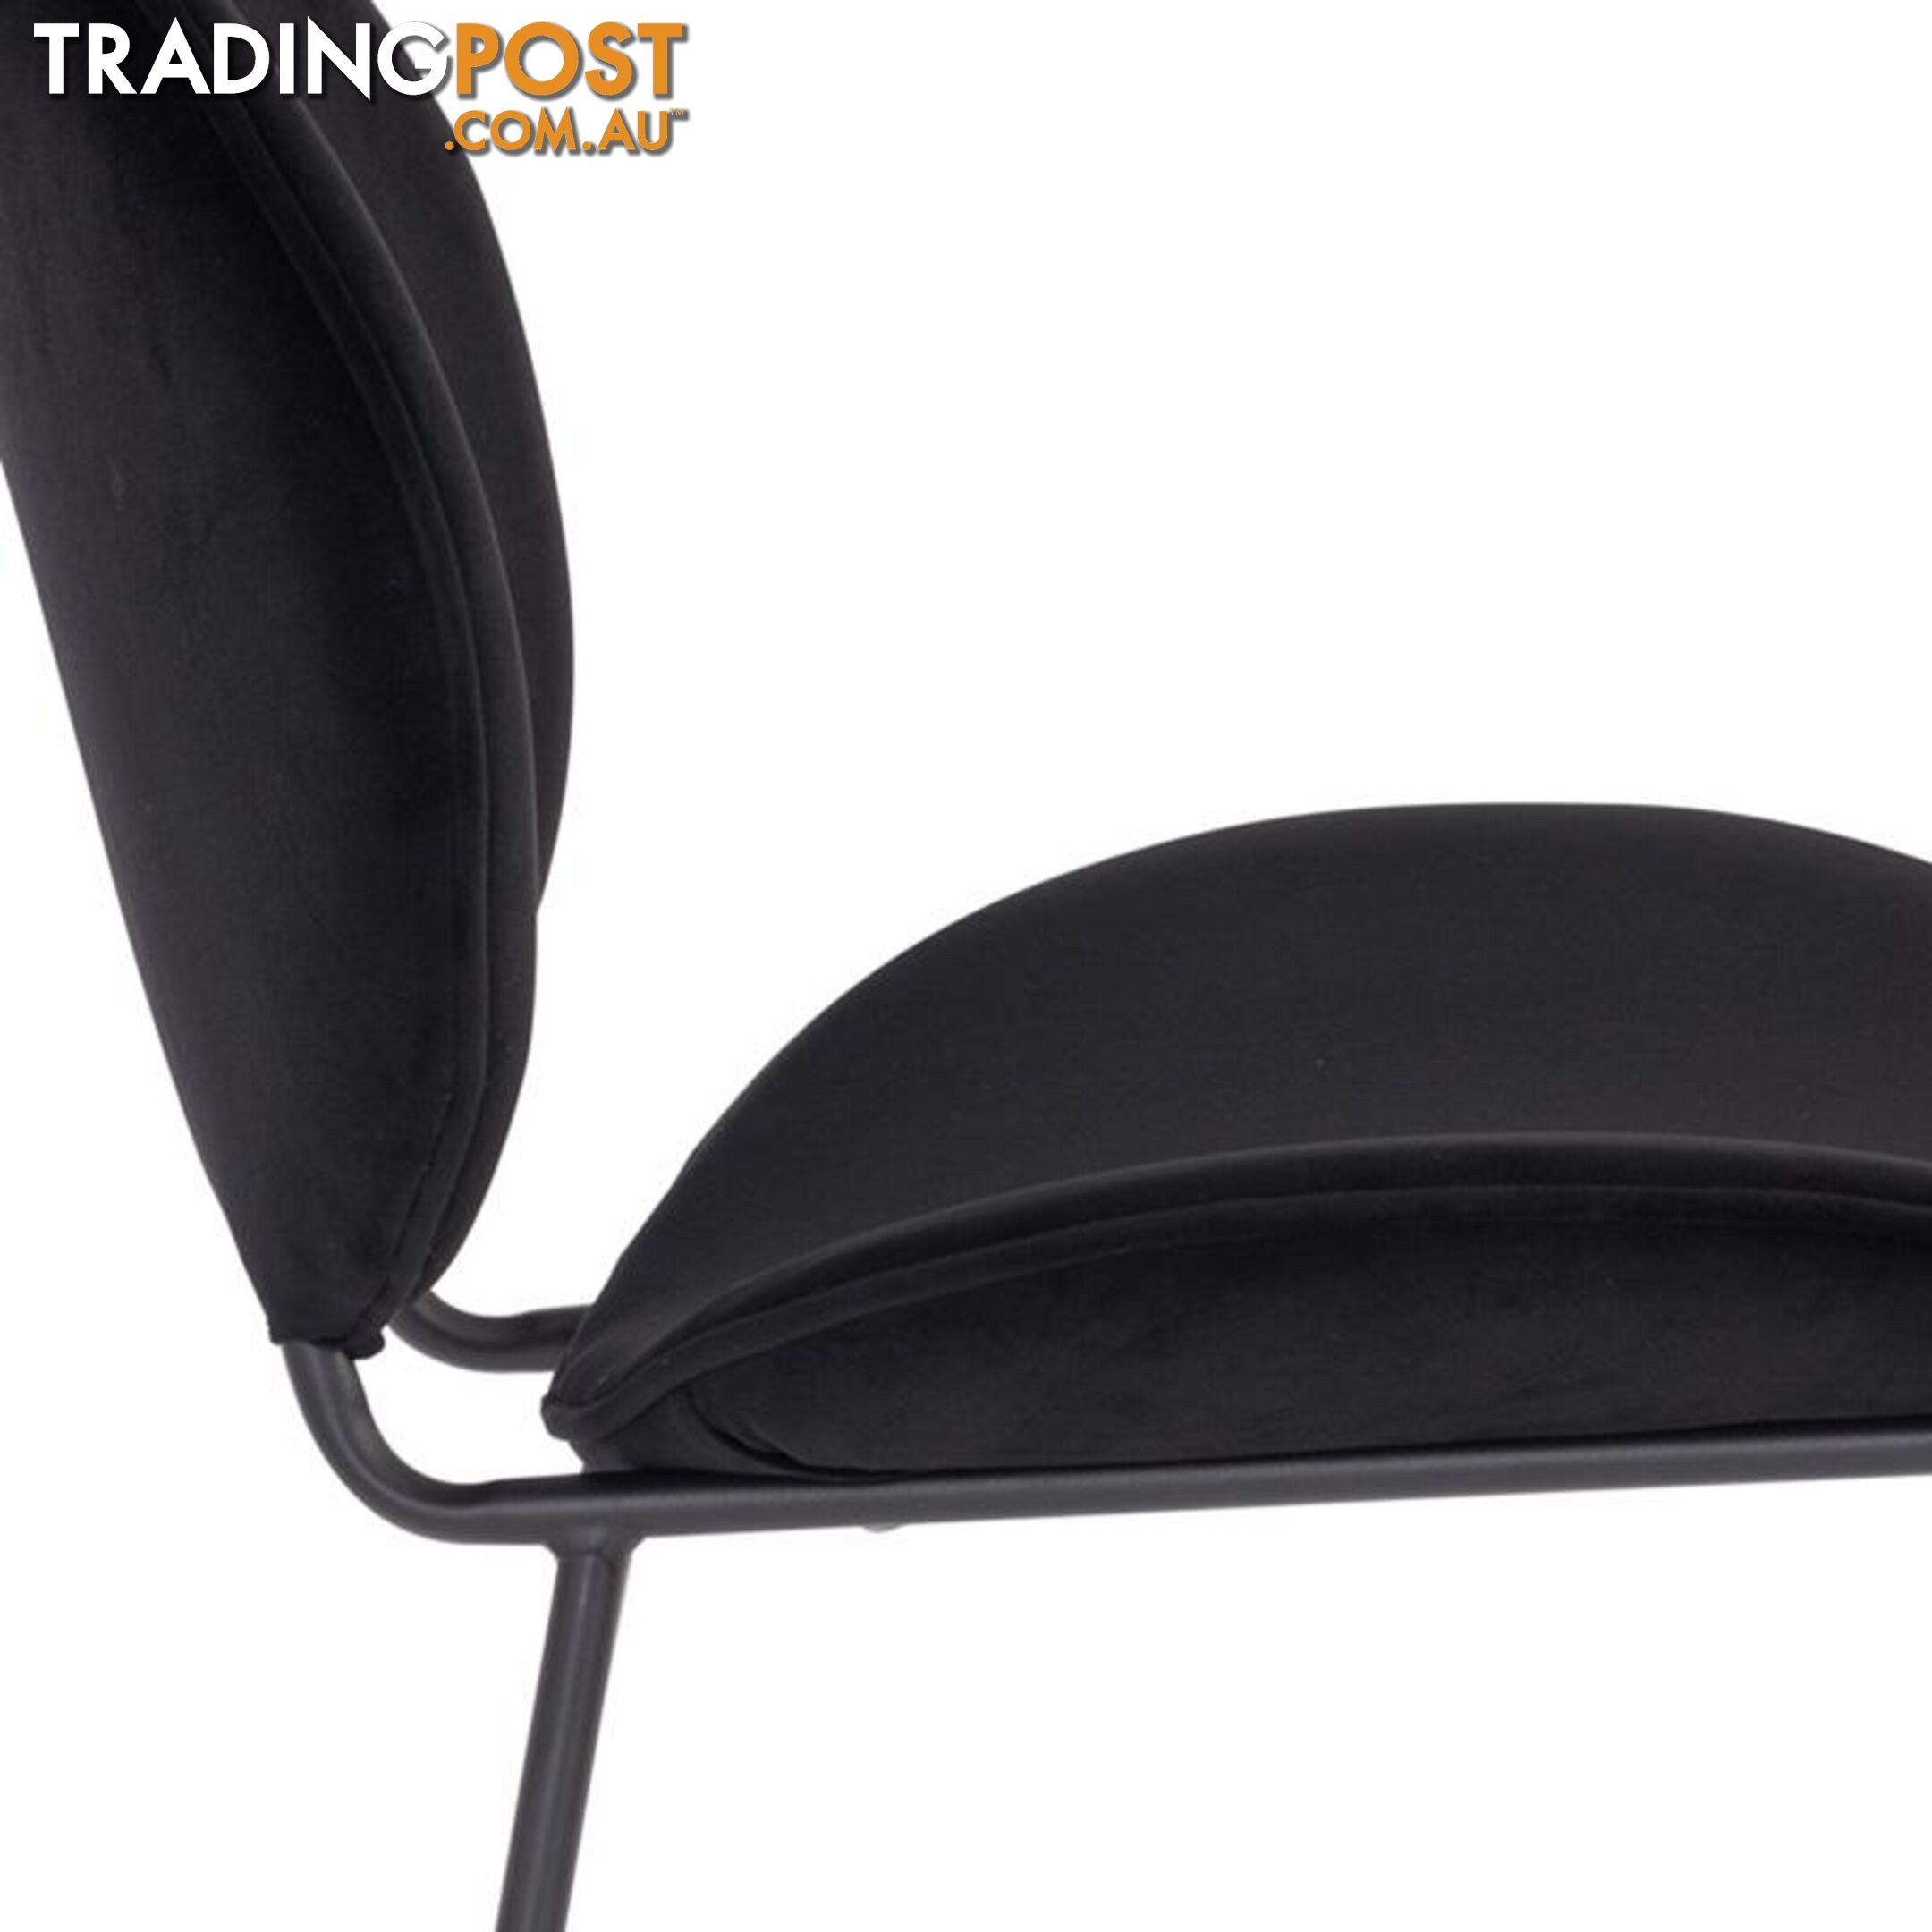 ORMER Dining Chair - Black - 241243 - 9334719010618